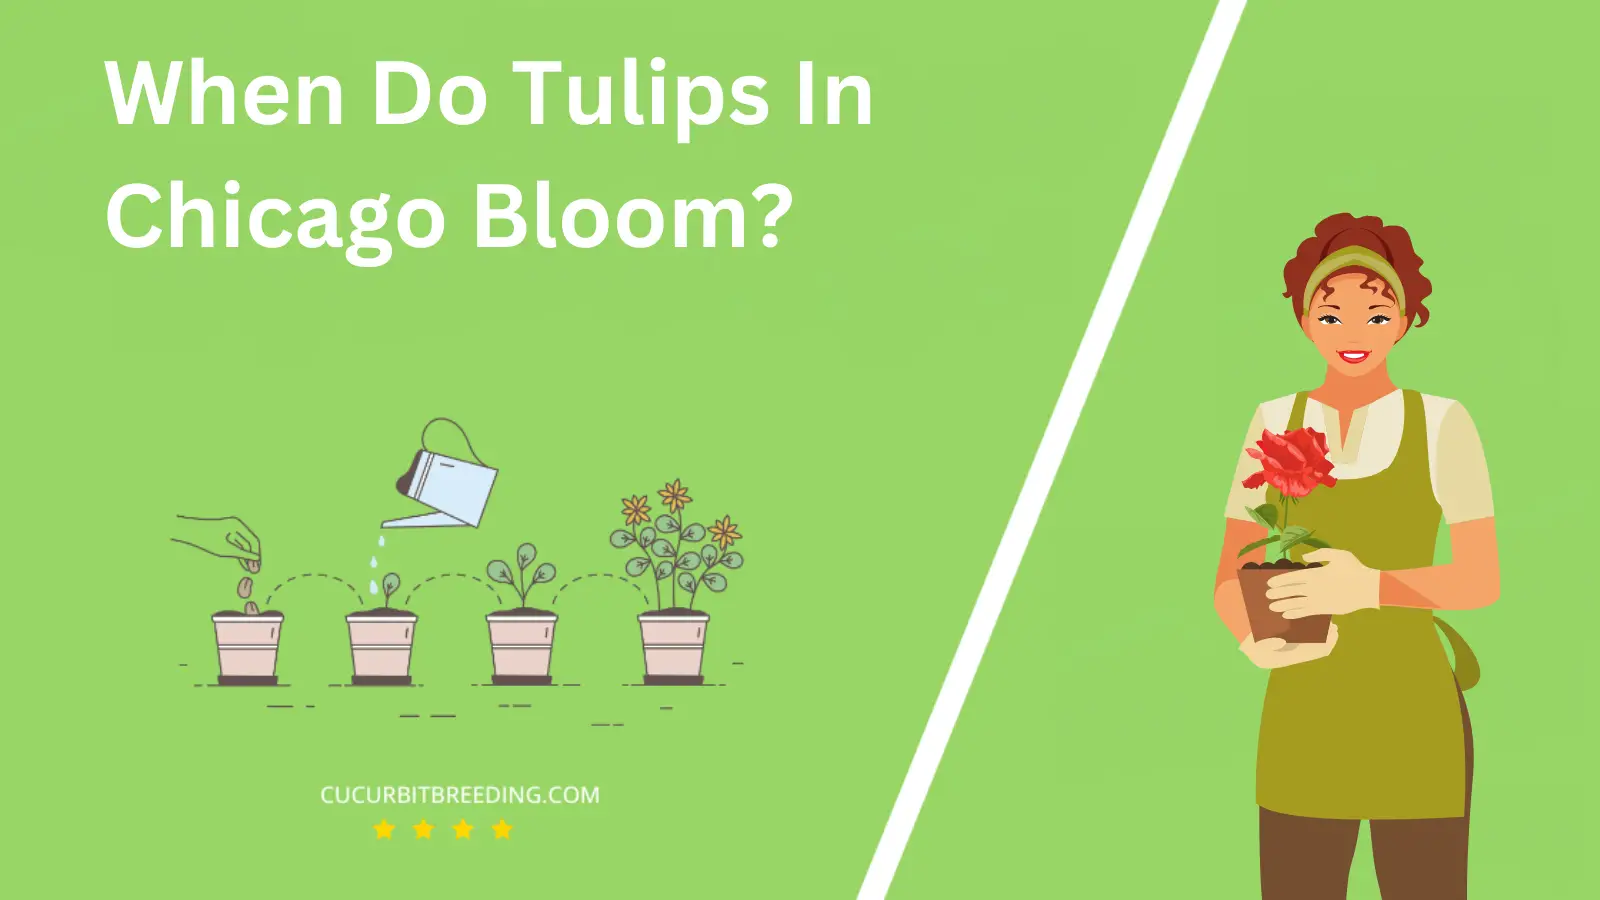 When Do Tulips In Chicago Bloom?